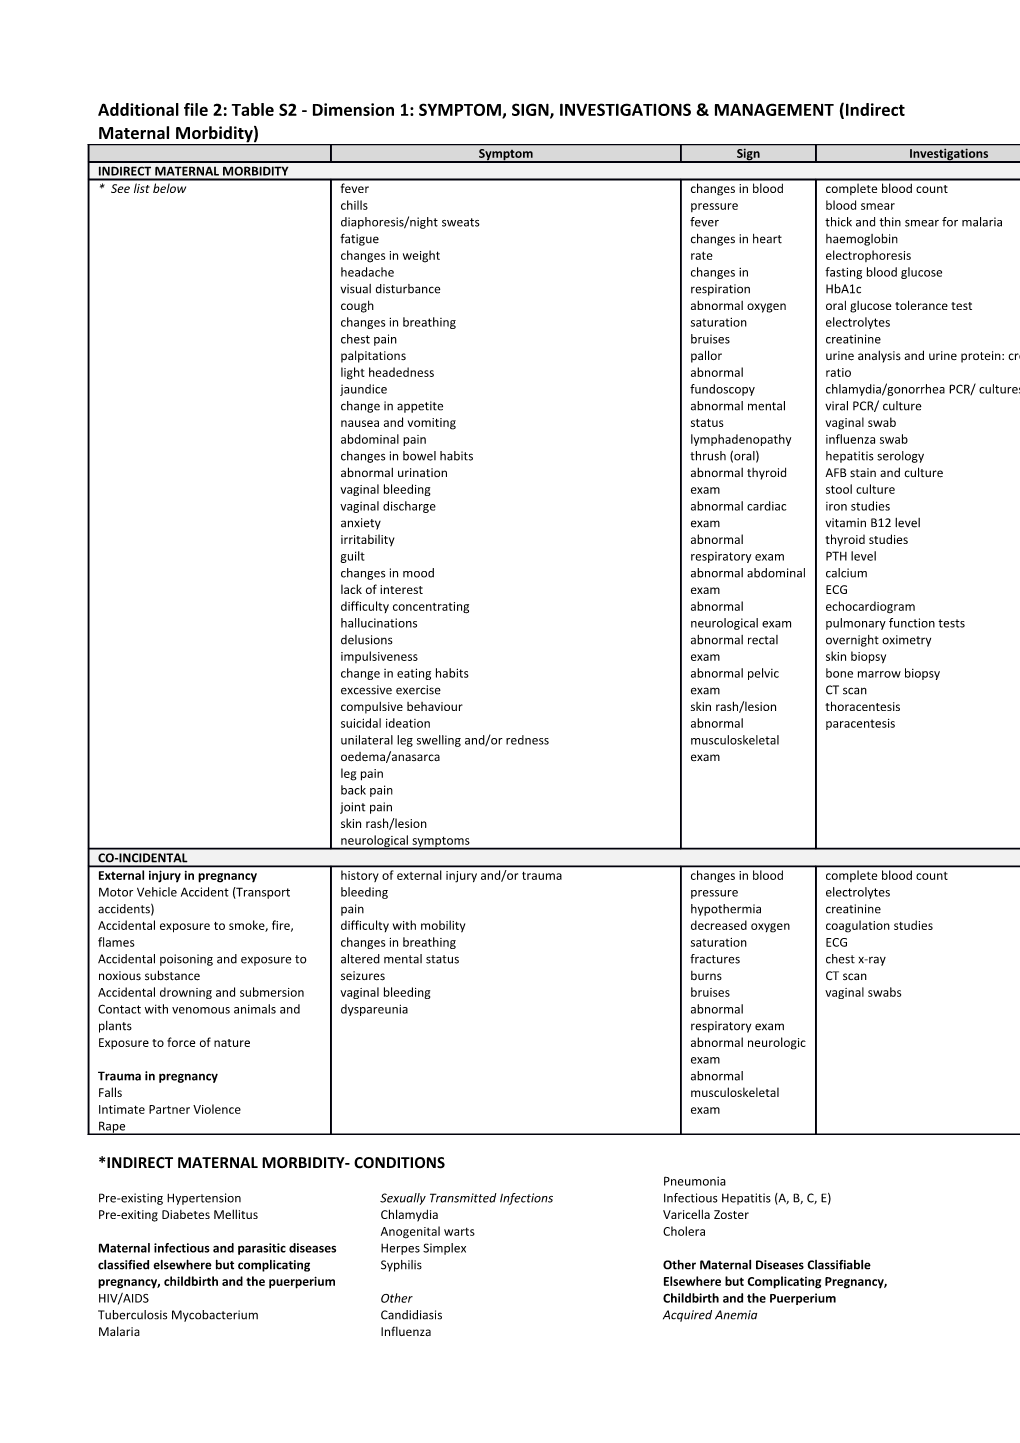 Additional File 2: Table S2 - Dimension 1: SYMPTOM, SIGN, INVESTIGATIONS & MANAGEMENT